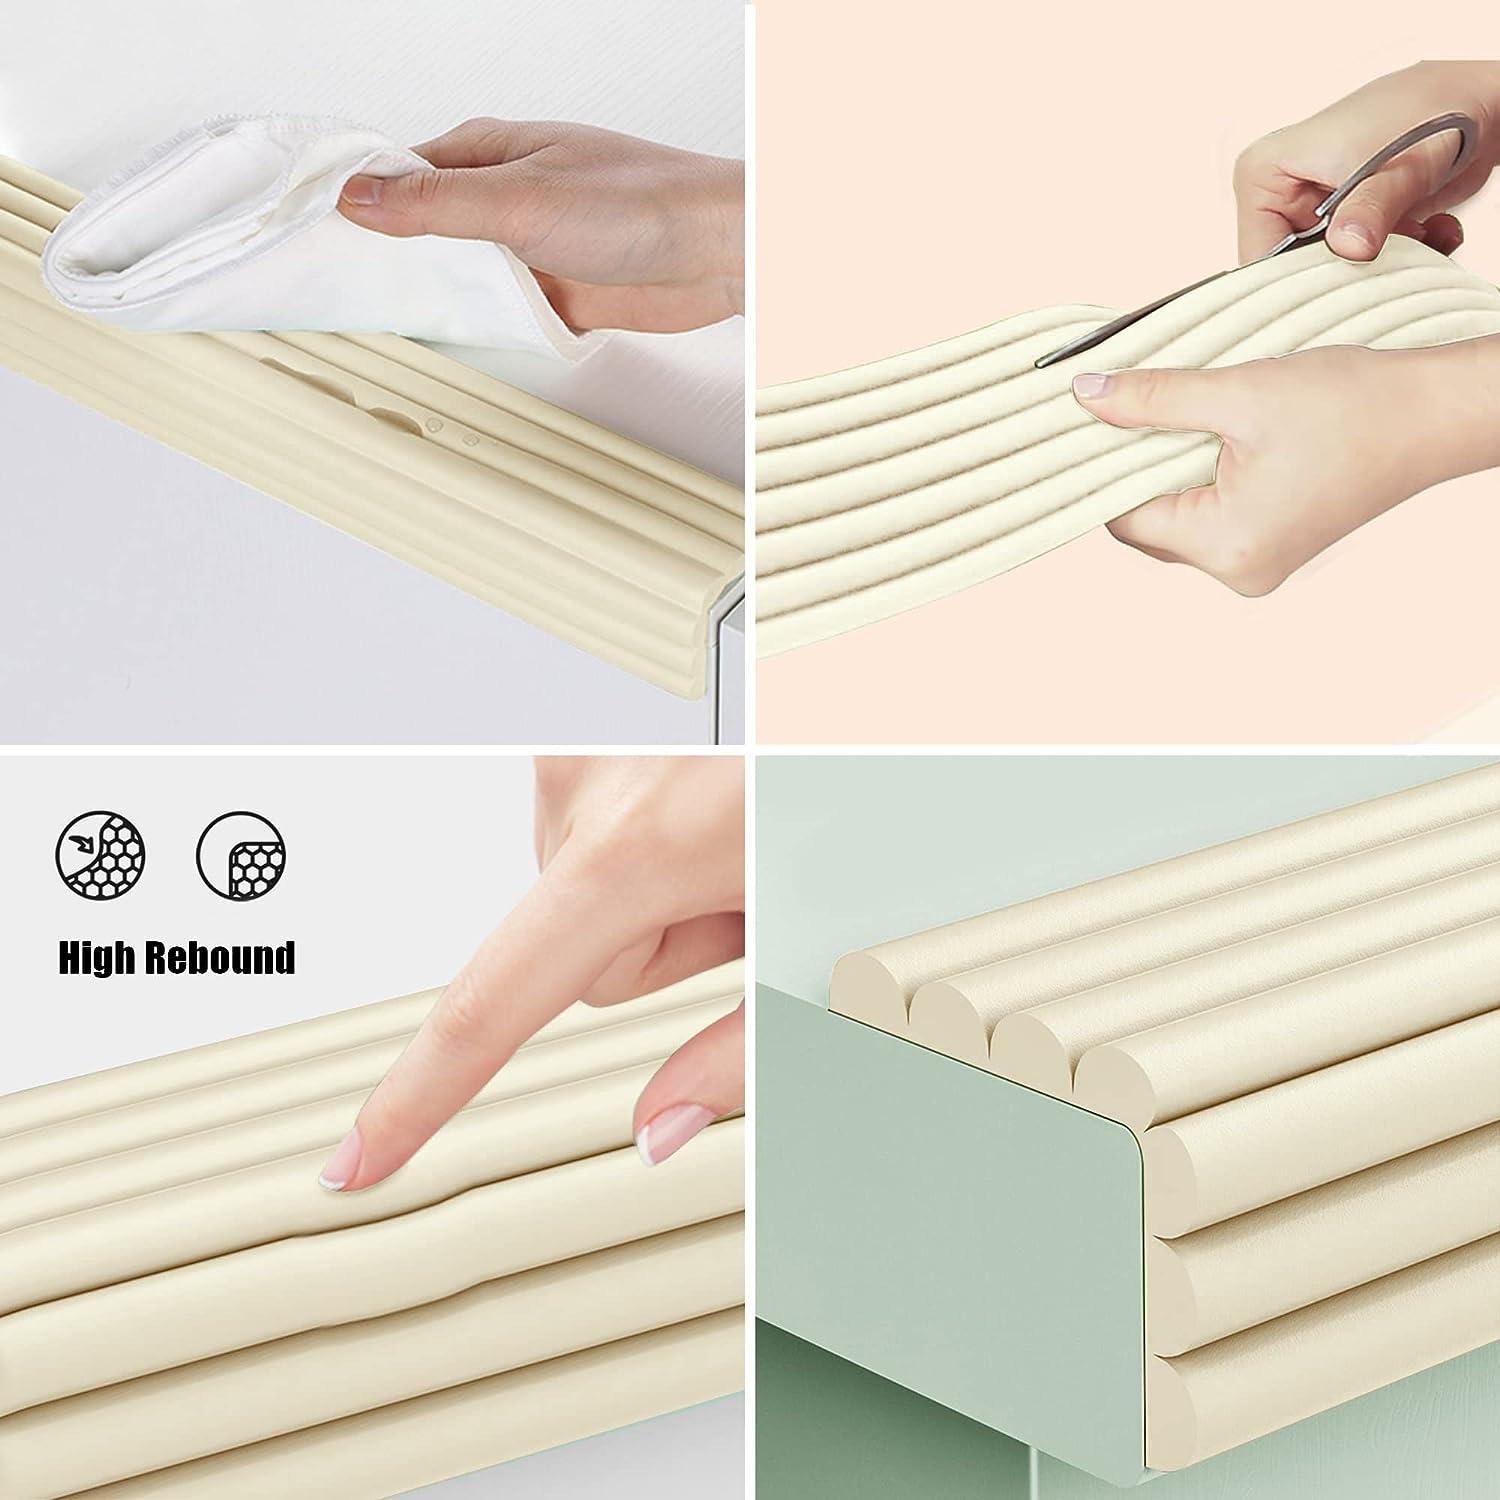 Soft & Extra Wide Edge Protector for Baby (12.5ft) with Strong 3M